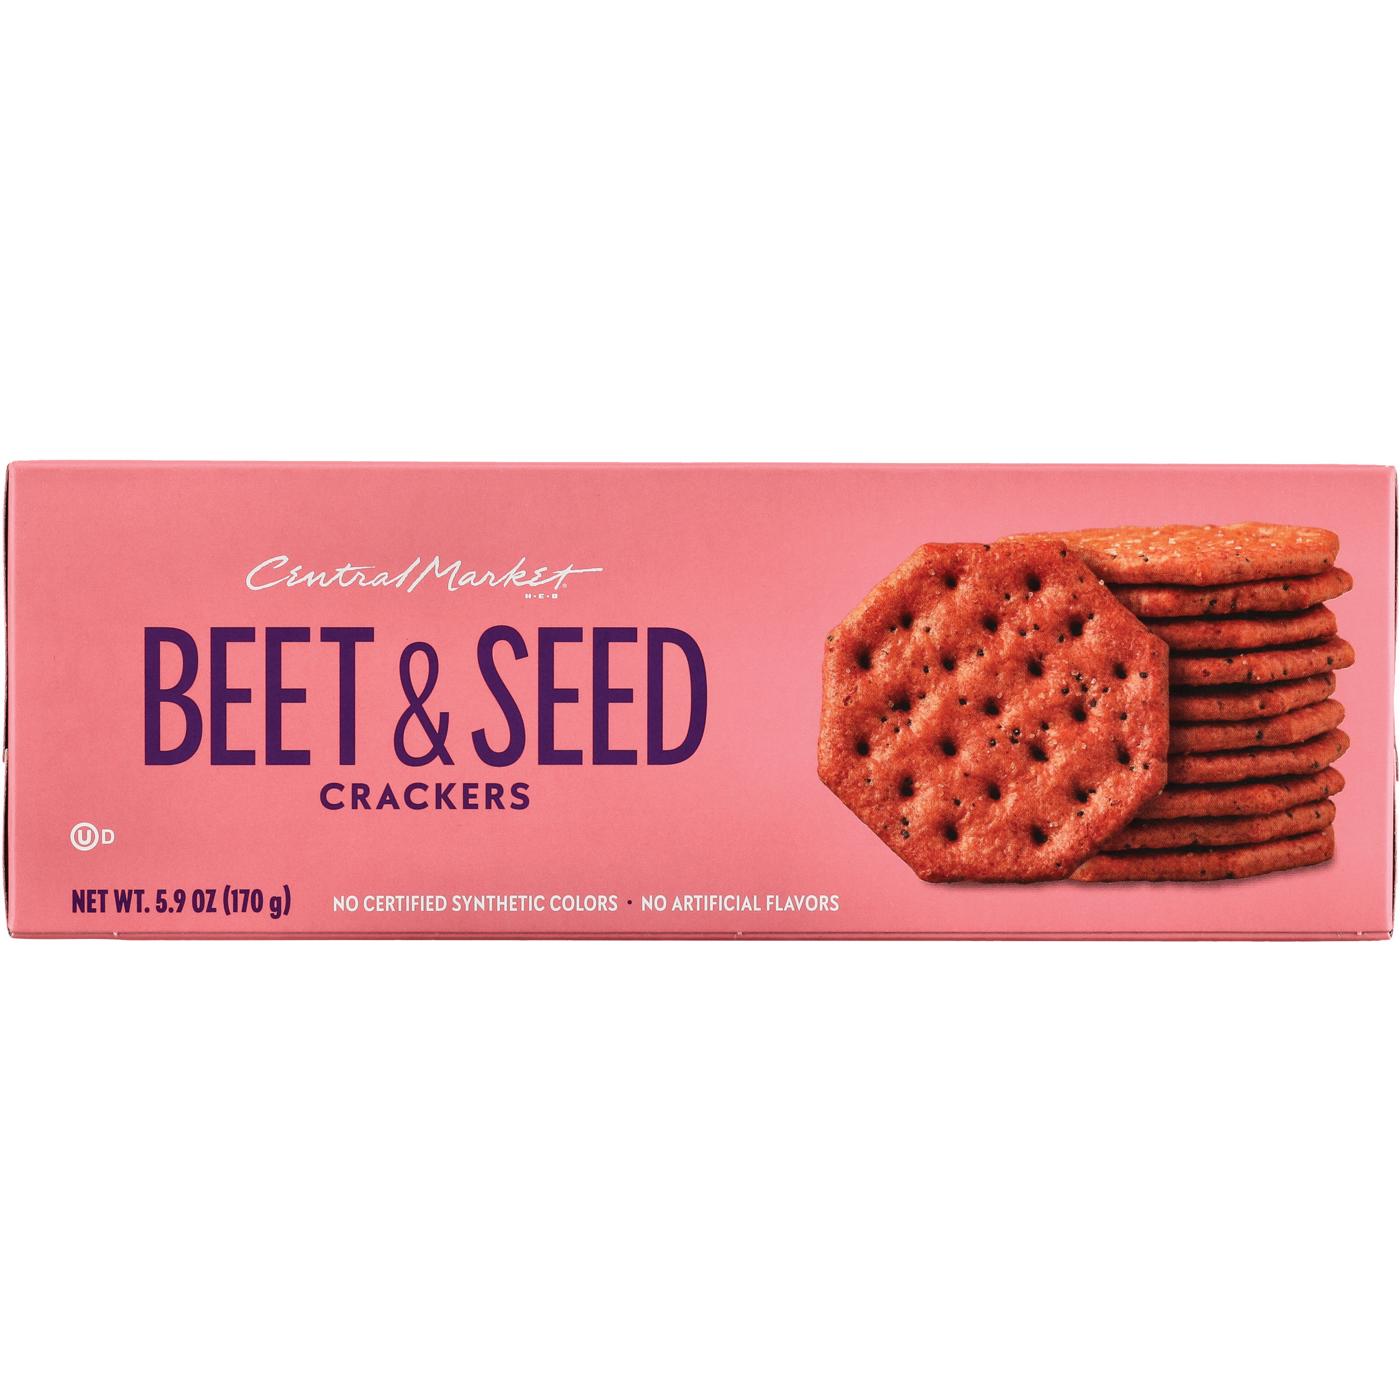 Central Market Beet & Seed Crackers; image 1 of 2